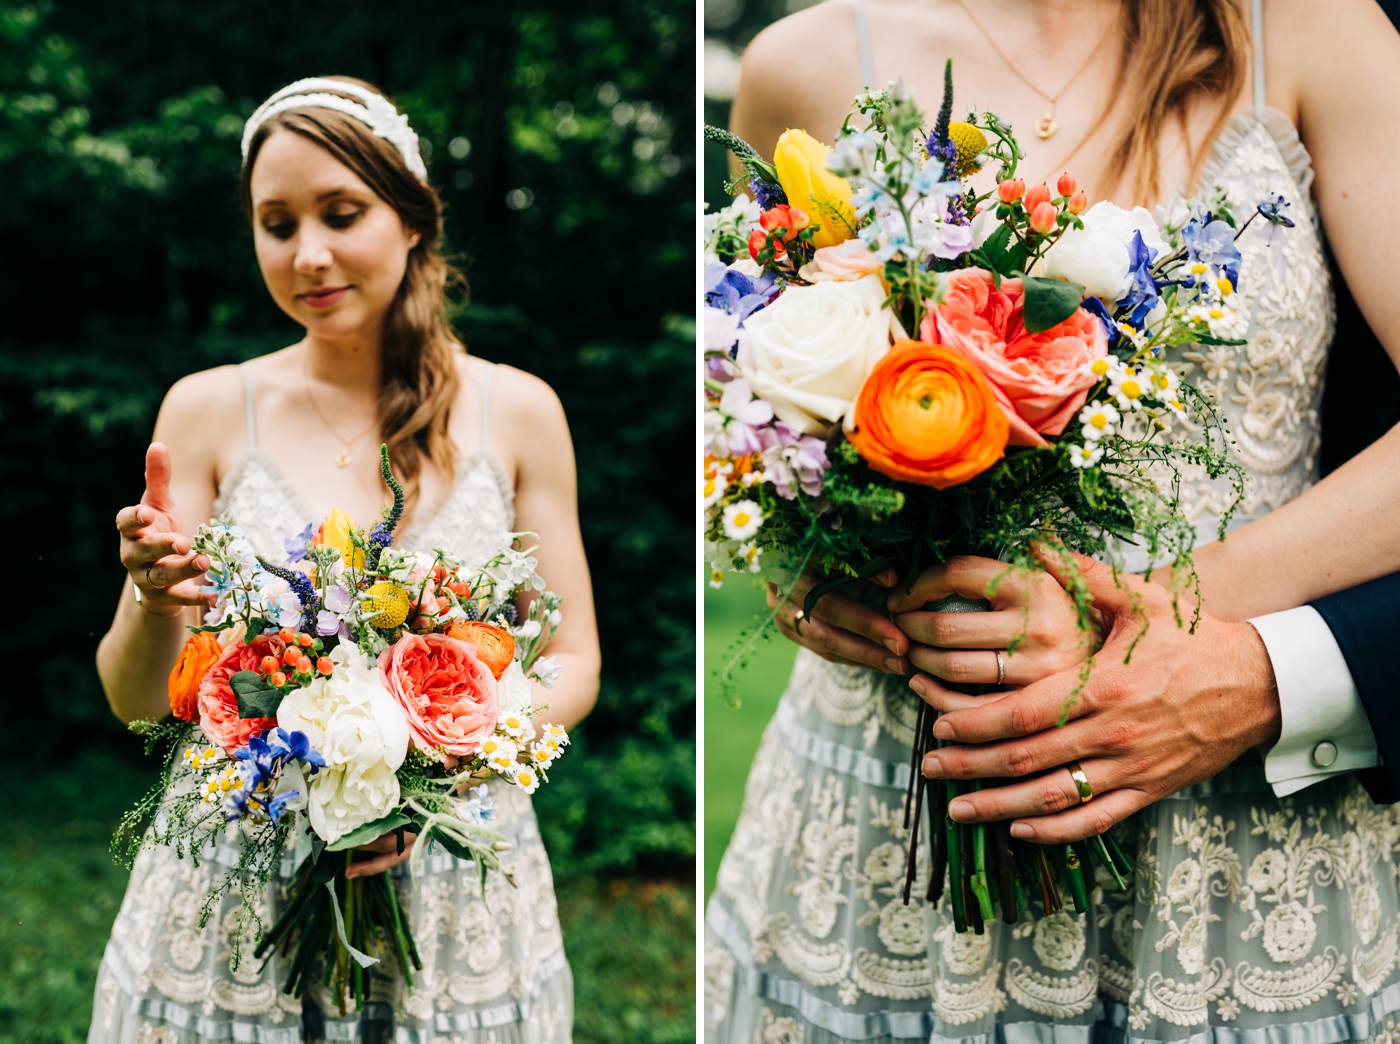 Bride holding a colorful bridal bouquet with wild flowers